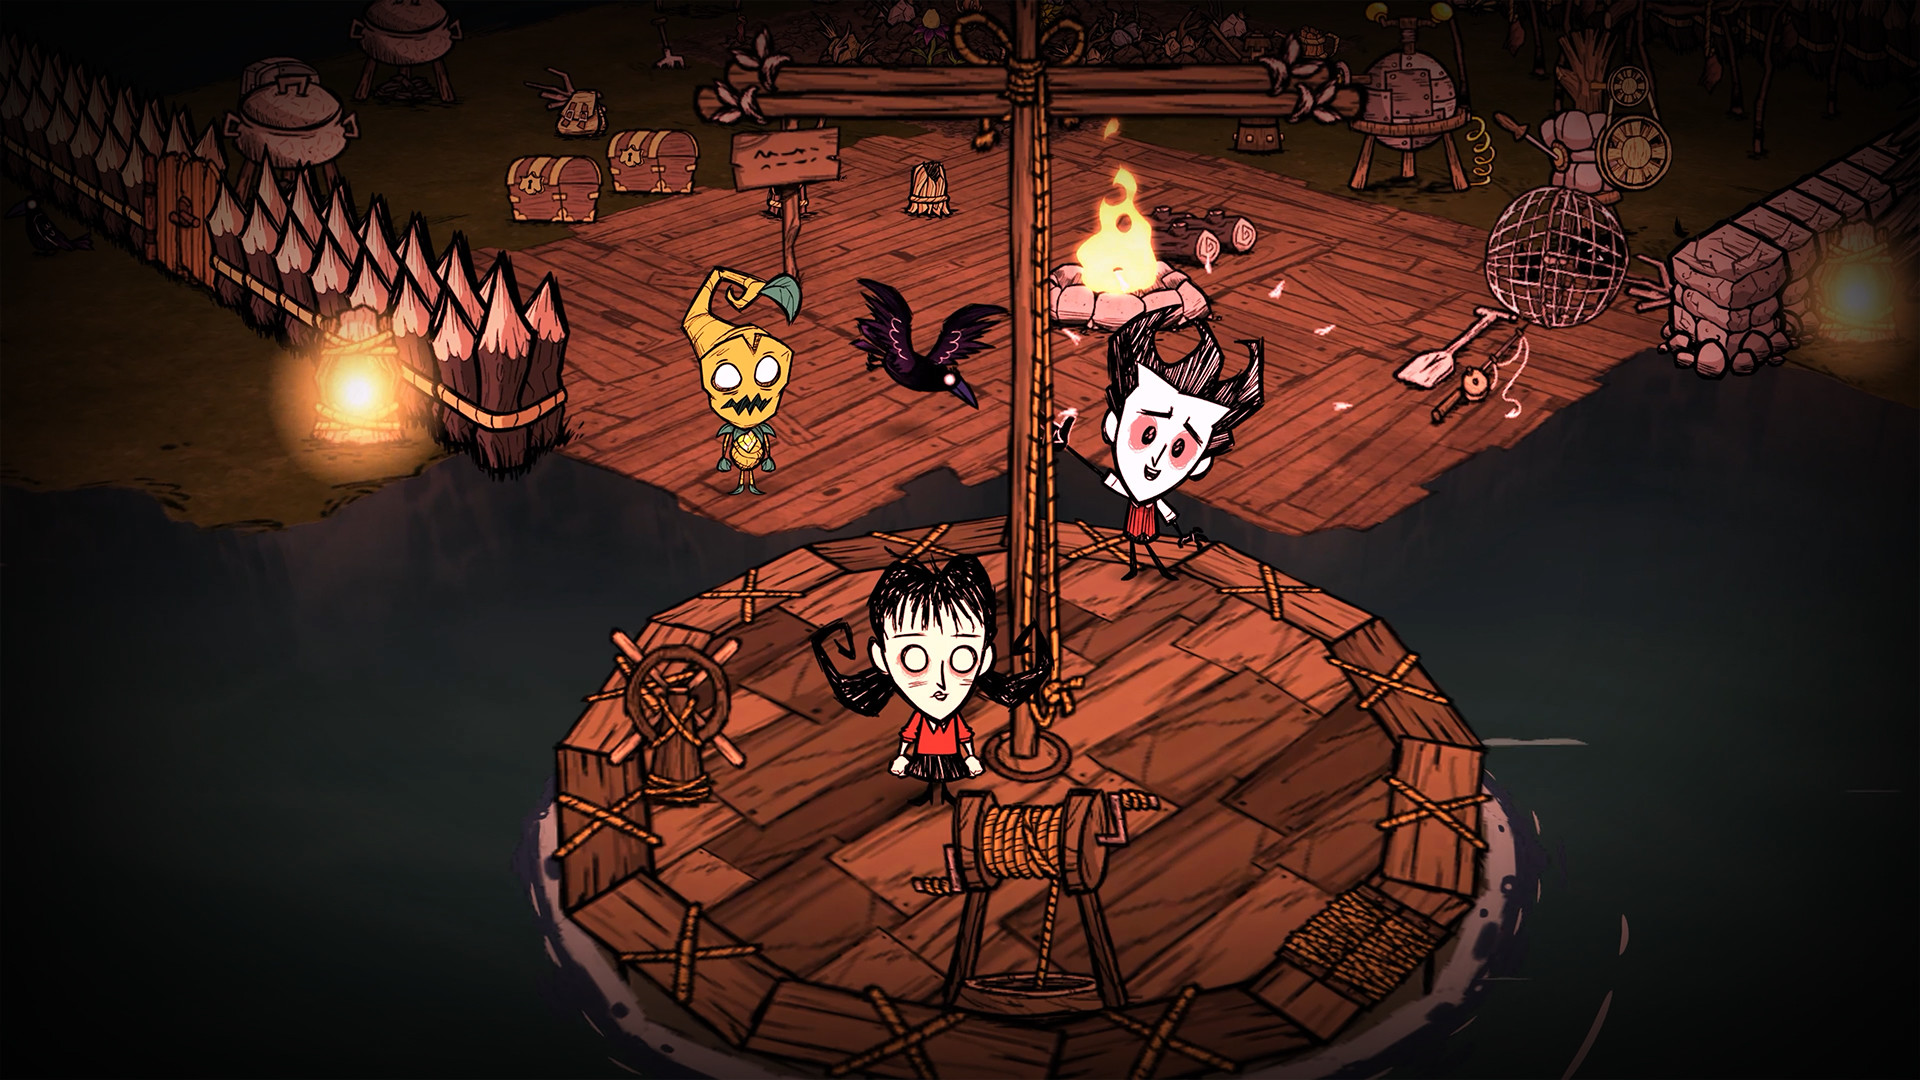 Dont Starve Together (Steam Gift | RU+CIS) 💳 CARDS 0%